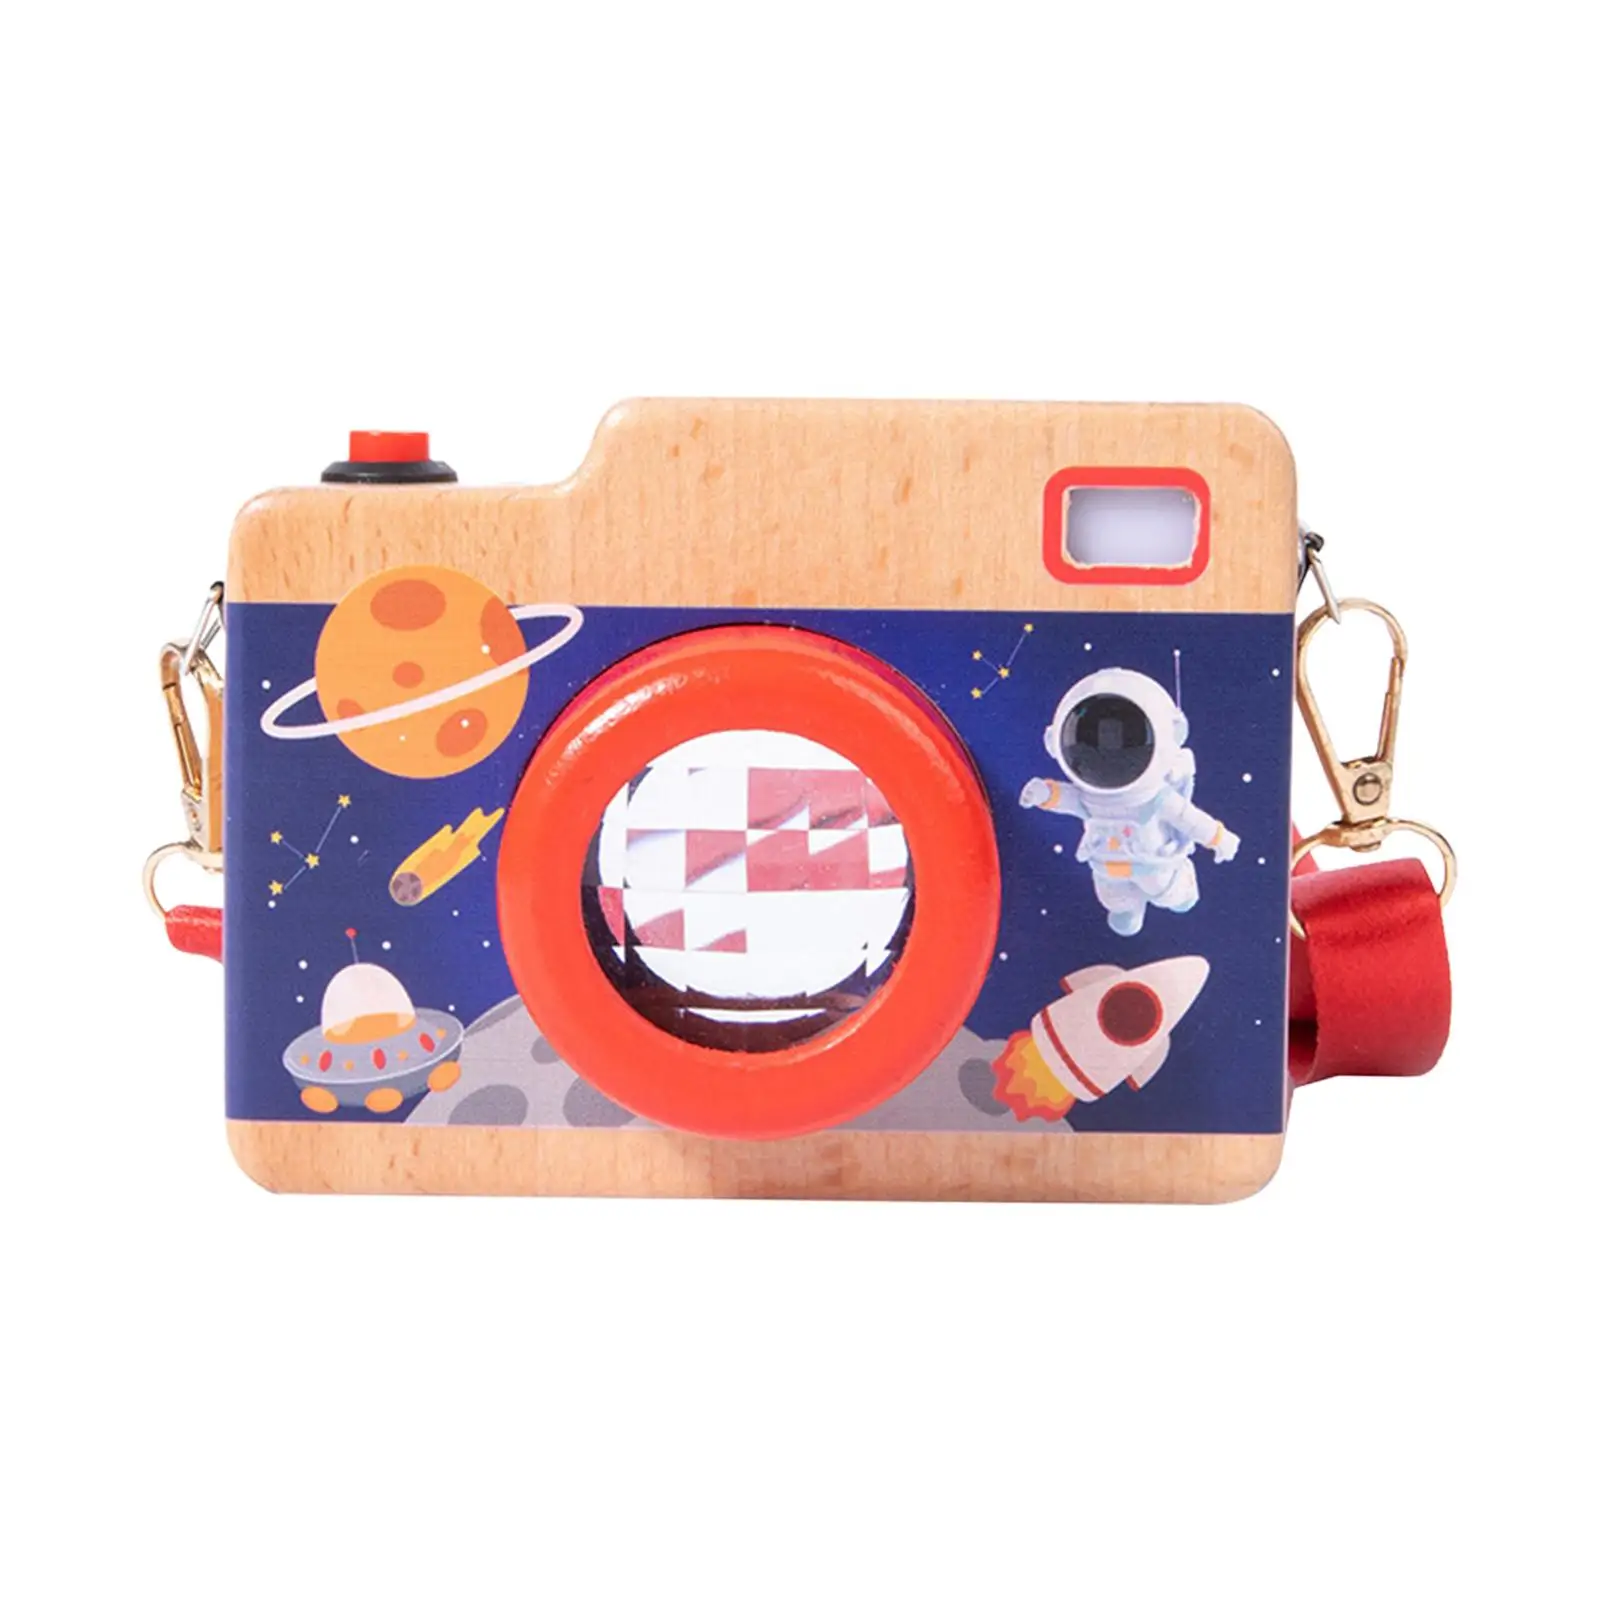 Cute Wood Camera Toys Handmade Fashion Clothing Accessory for Photographed Props Intelligent Toys Birthday Party Toy Preschool